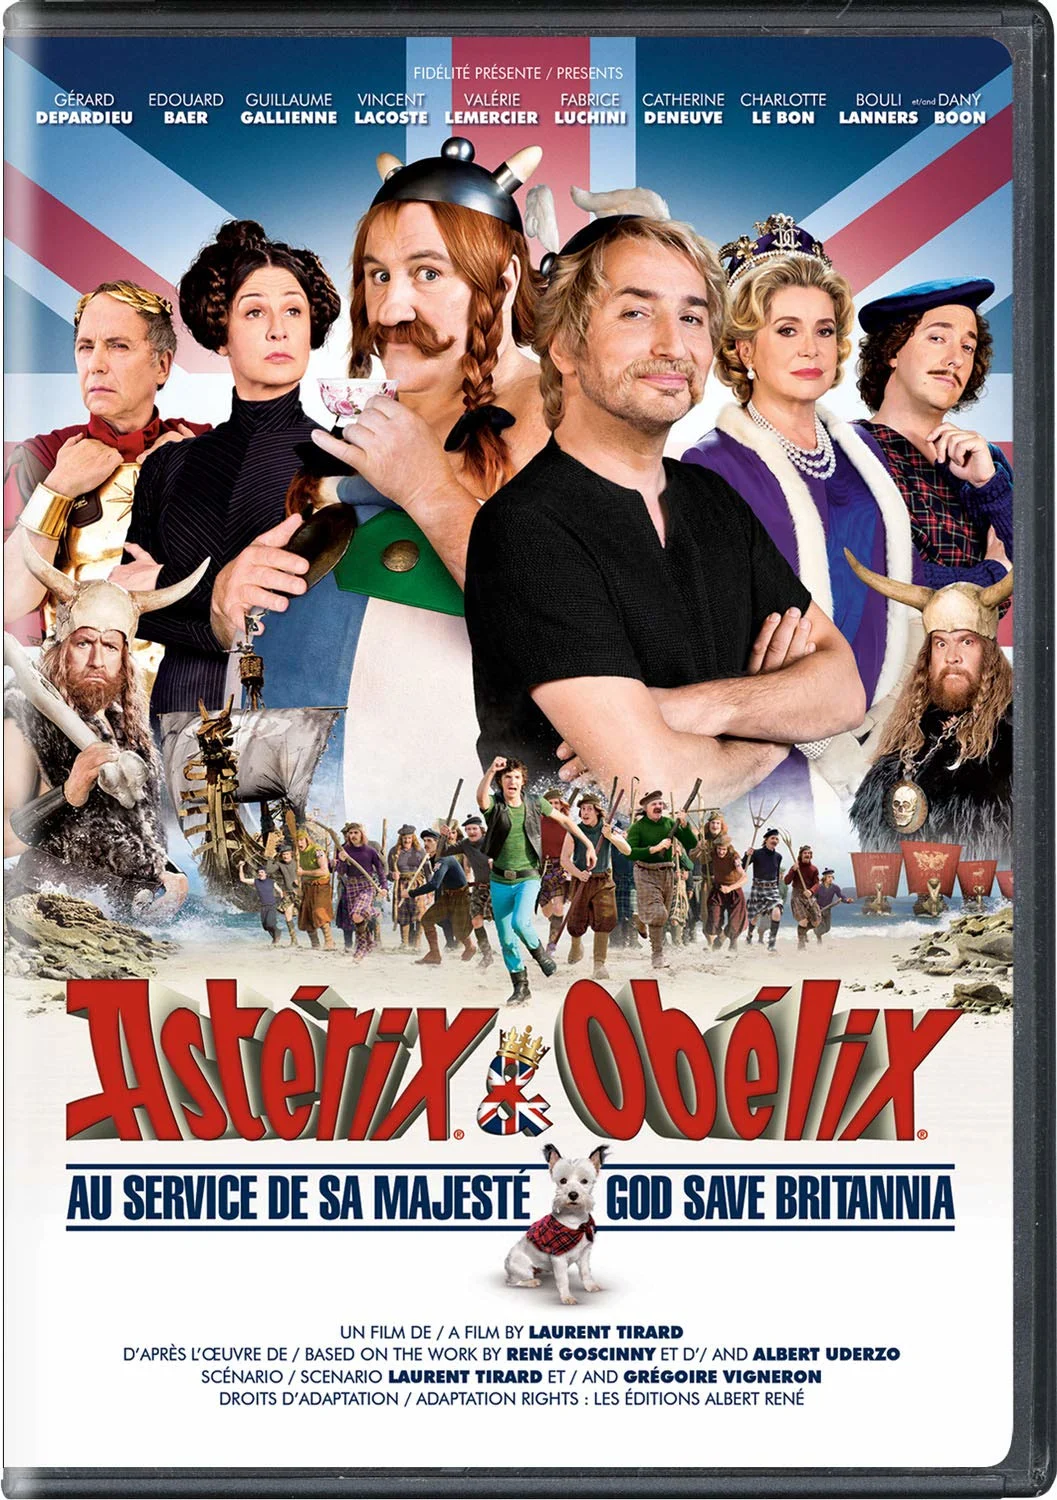 Asterix & Obelix: God Save Brittania (DVD) – French on MovieShack